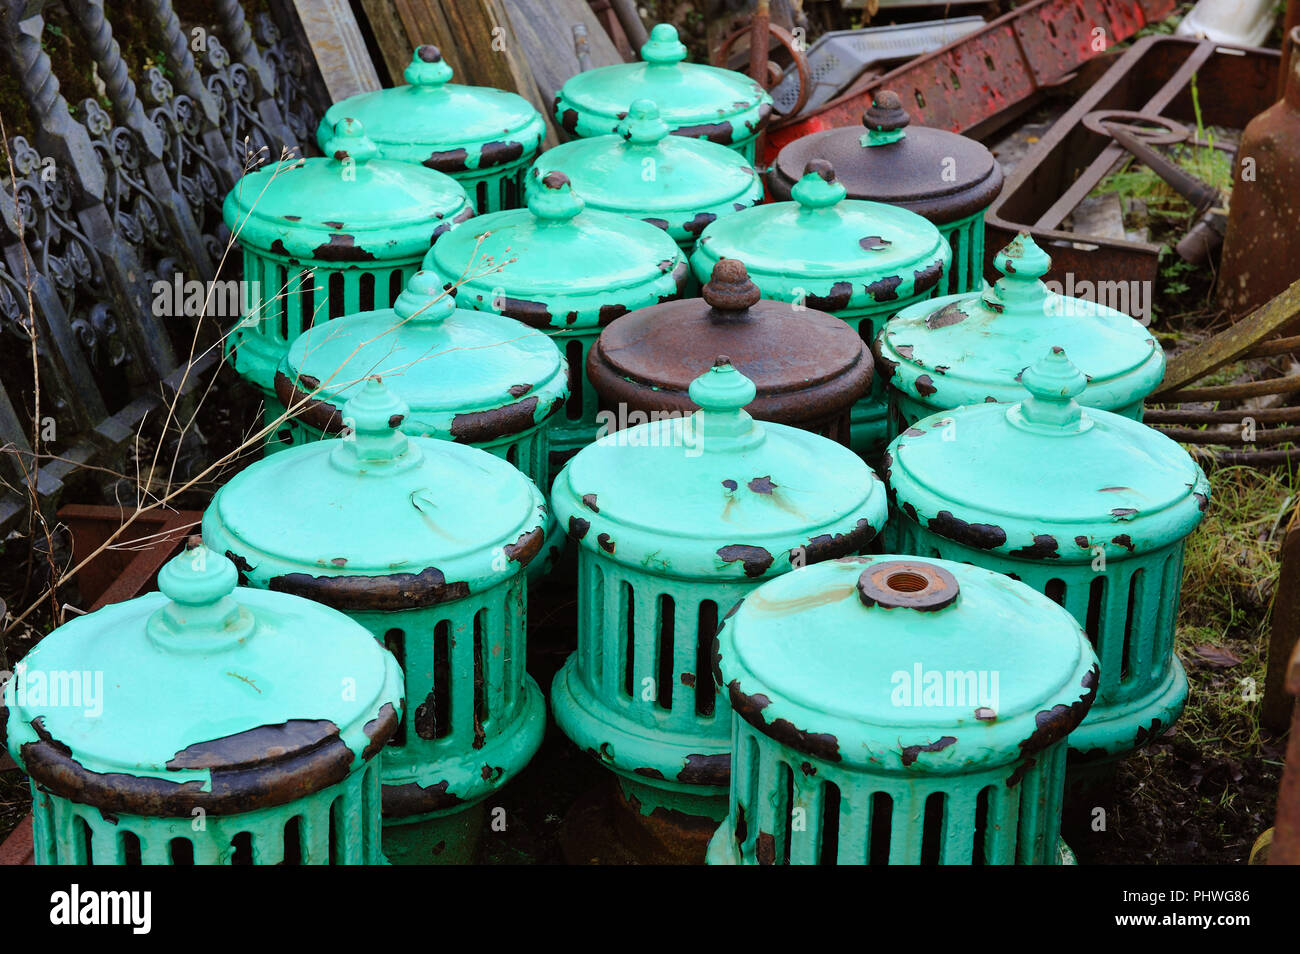 Old cast iron ventilators stacked in a scrapyard Stock Photo